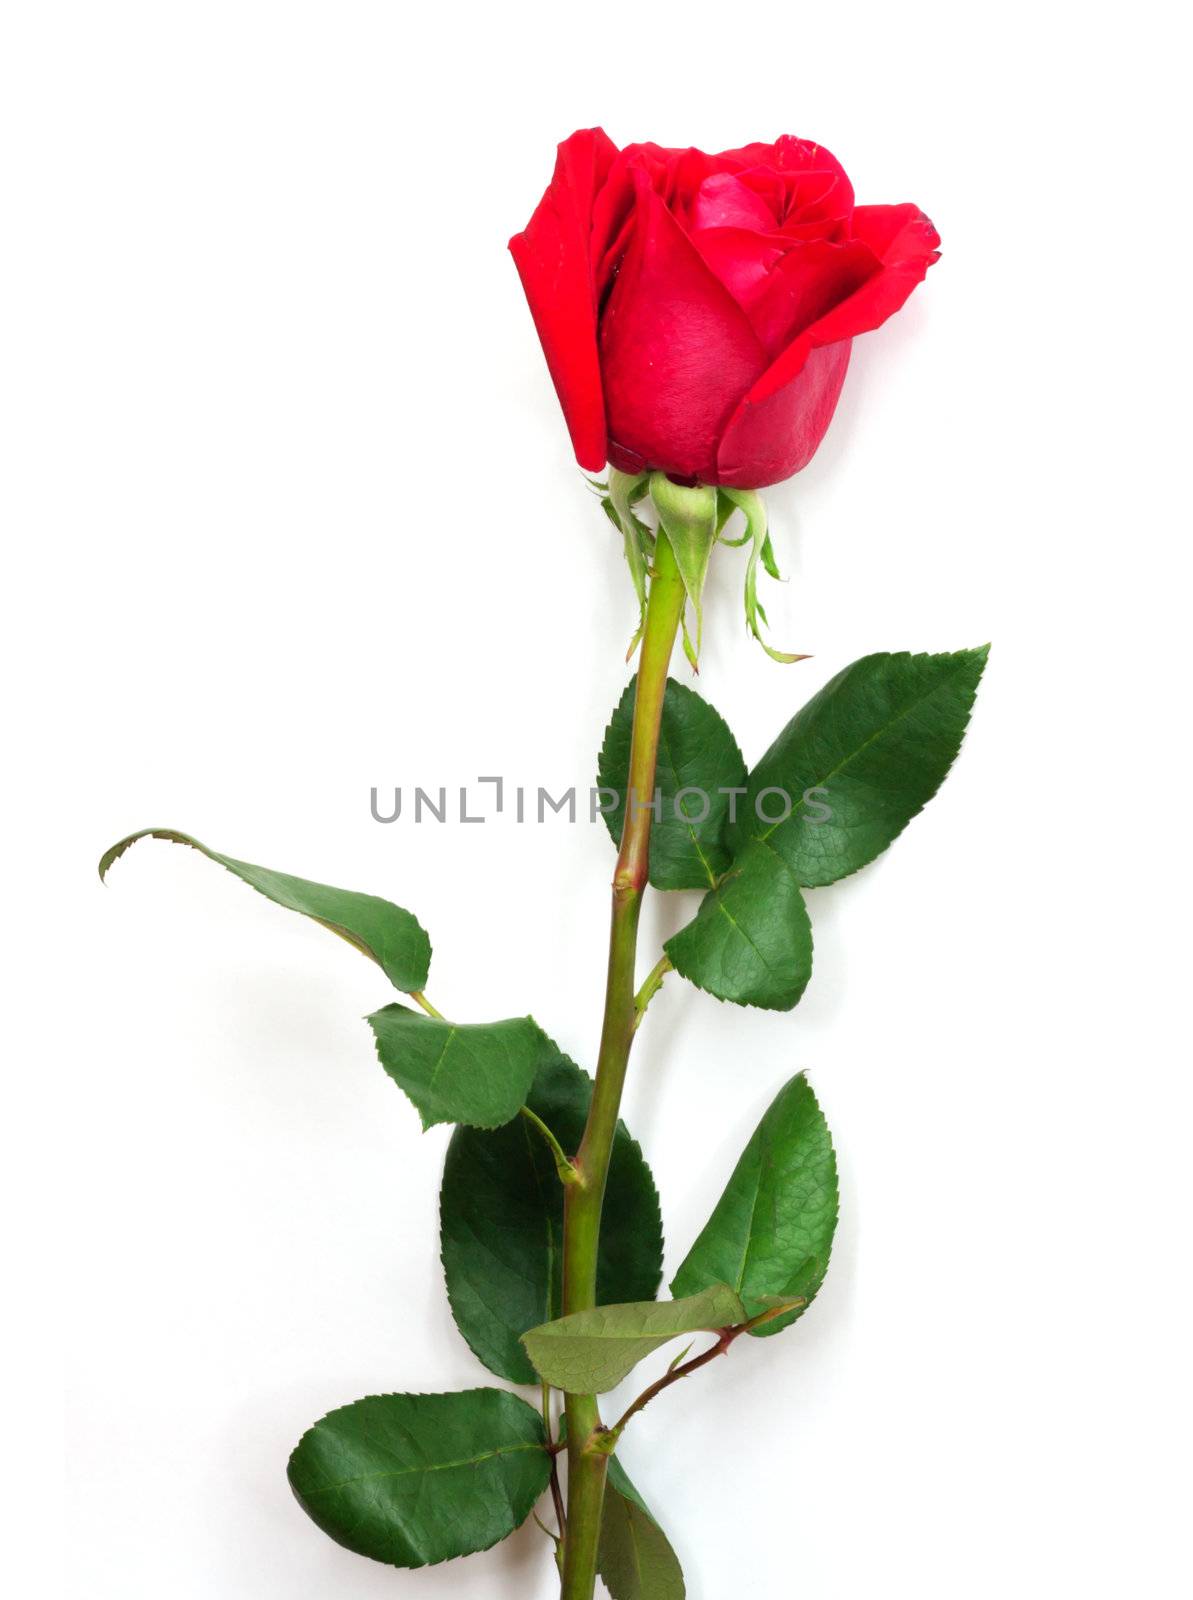 A Isolated red rose on white background 